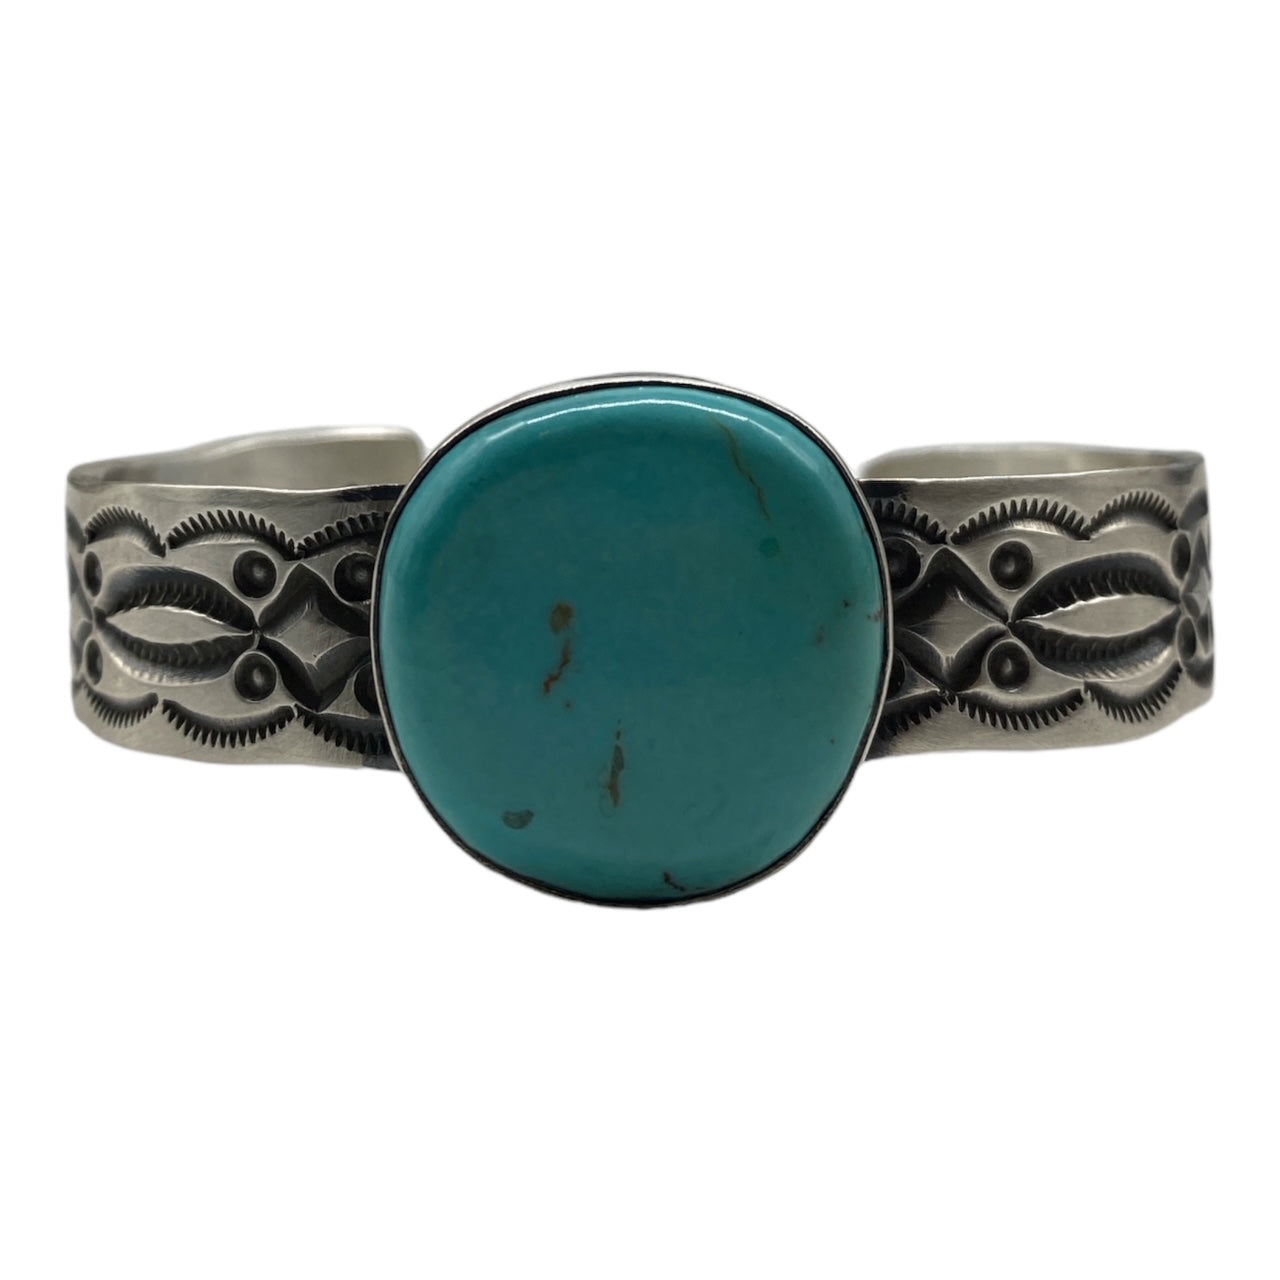 Native American Jewelry, indian Jewelry Navajo turquoise jewelry, silver jewelry, telluride , Chimney Butte